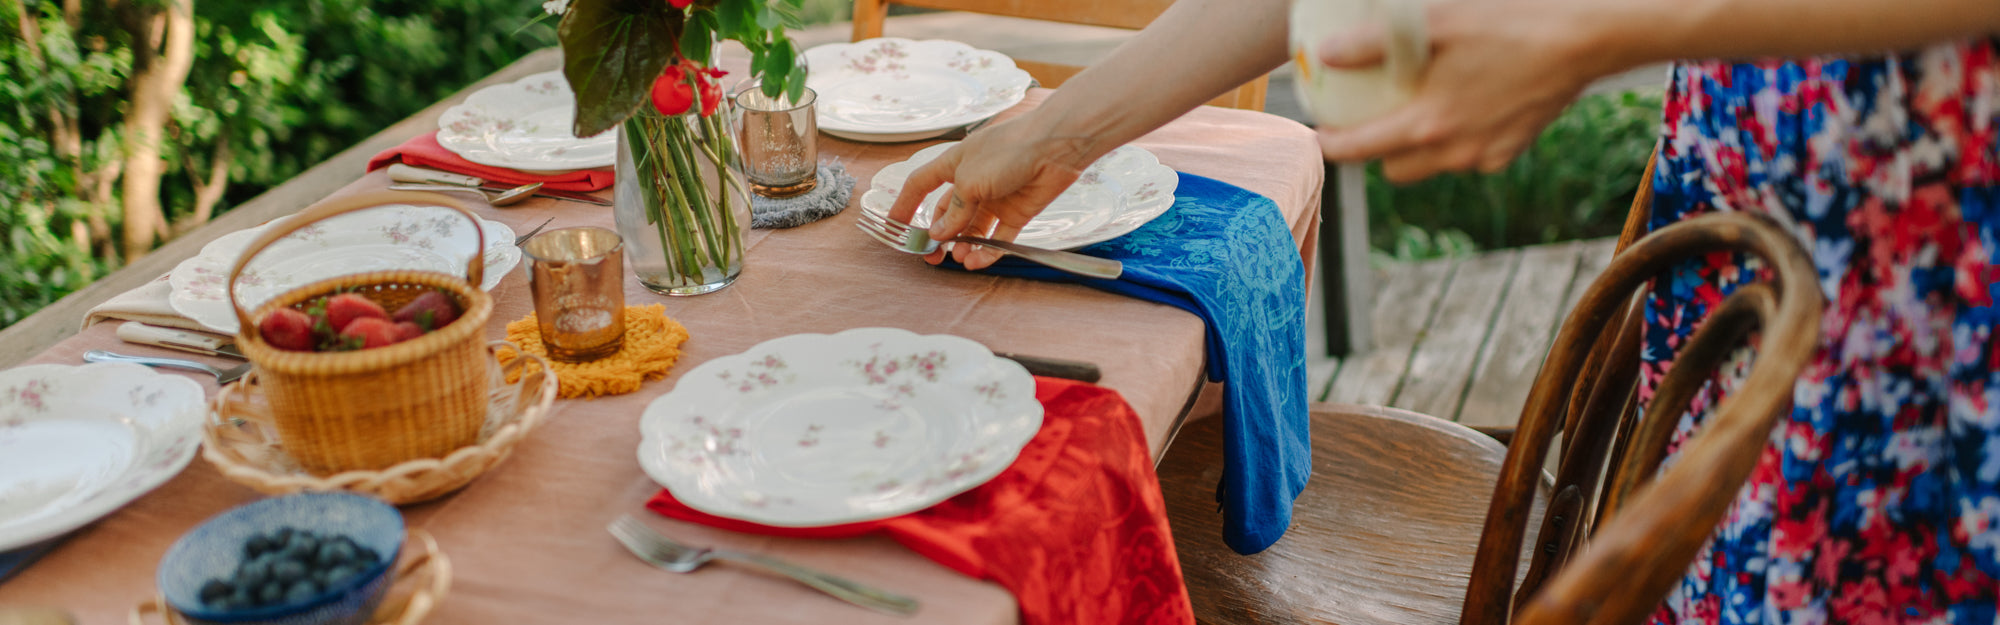 Beautiful screen printed kitchen towels serve as napkins in a gorgeous outdoor table setting for a summer gathering.